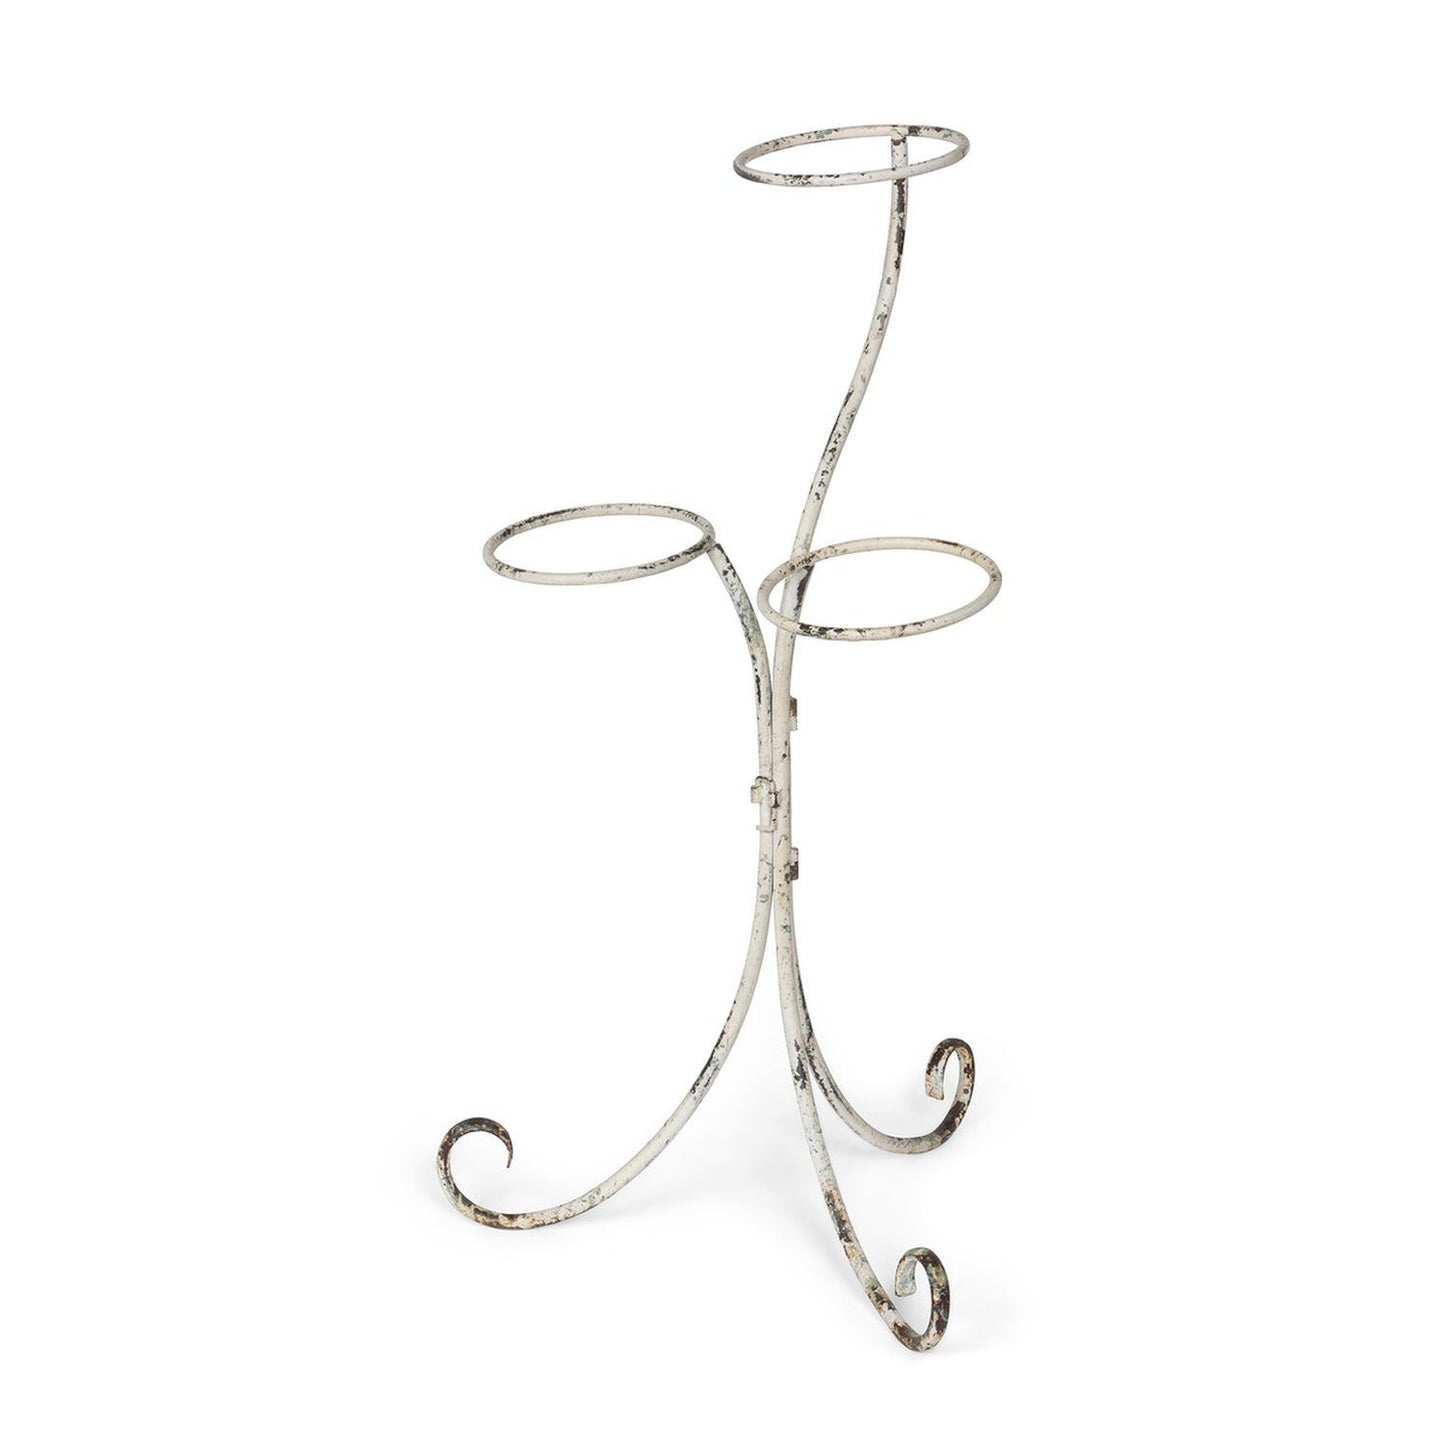 Park Hill Collection Iron Tiered Standing Pot Rack